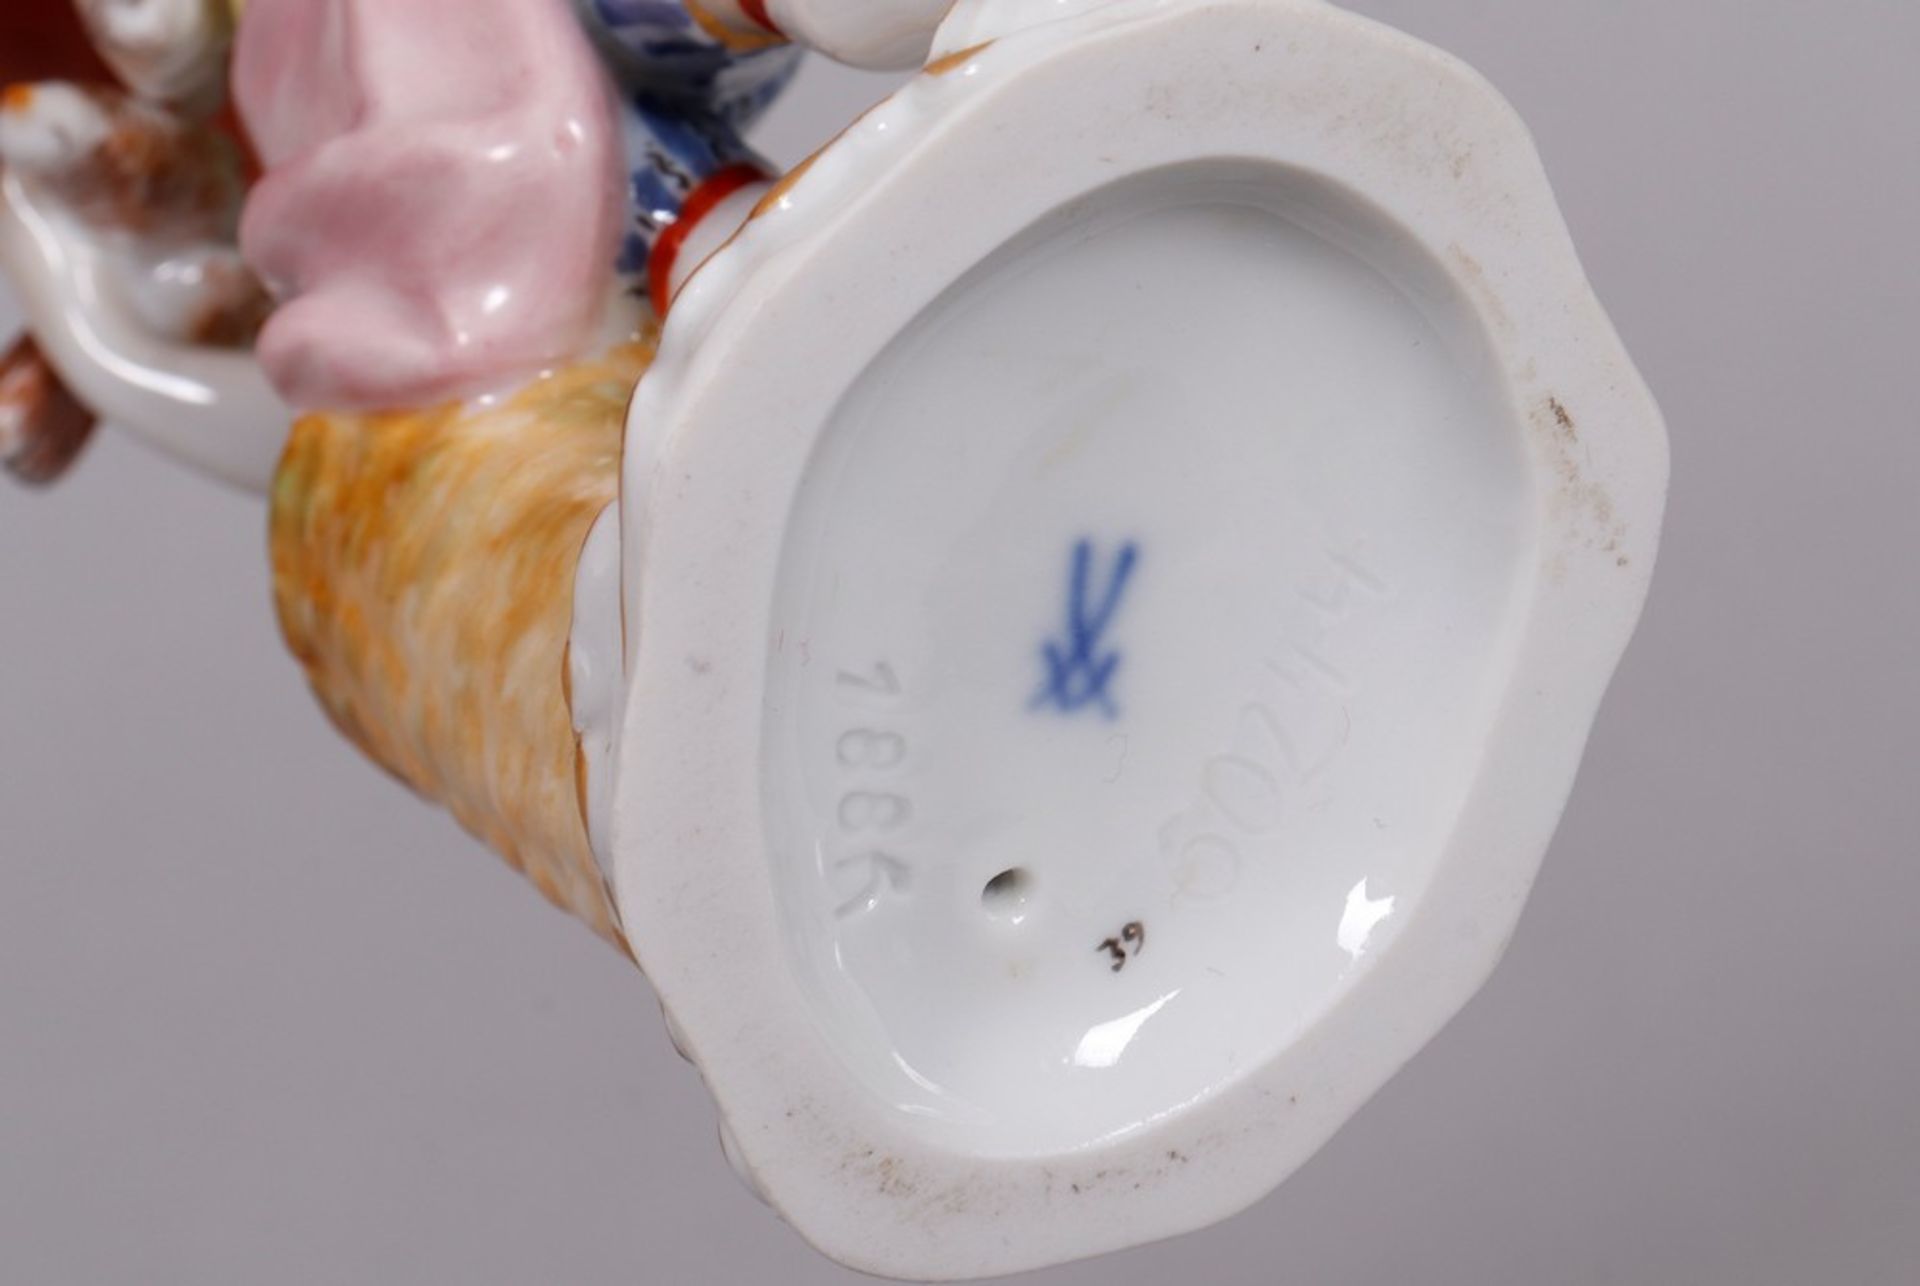 "Cook plucking a rooster", design by Peter Reinicke for Meissen, from the "Cris de Paris" series, p - Image 7 of 7